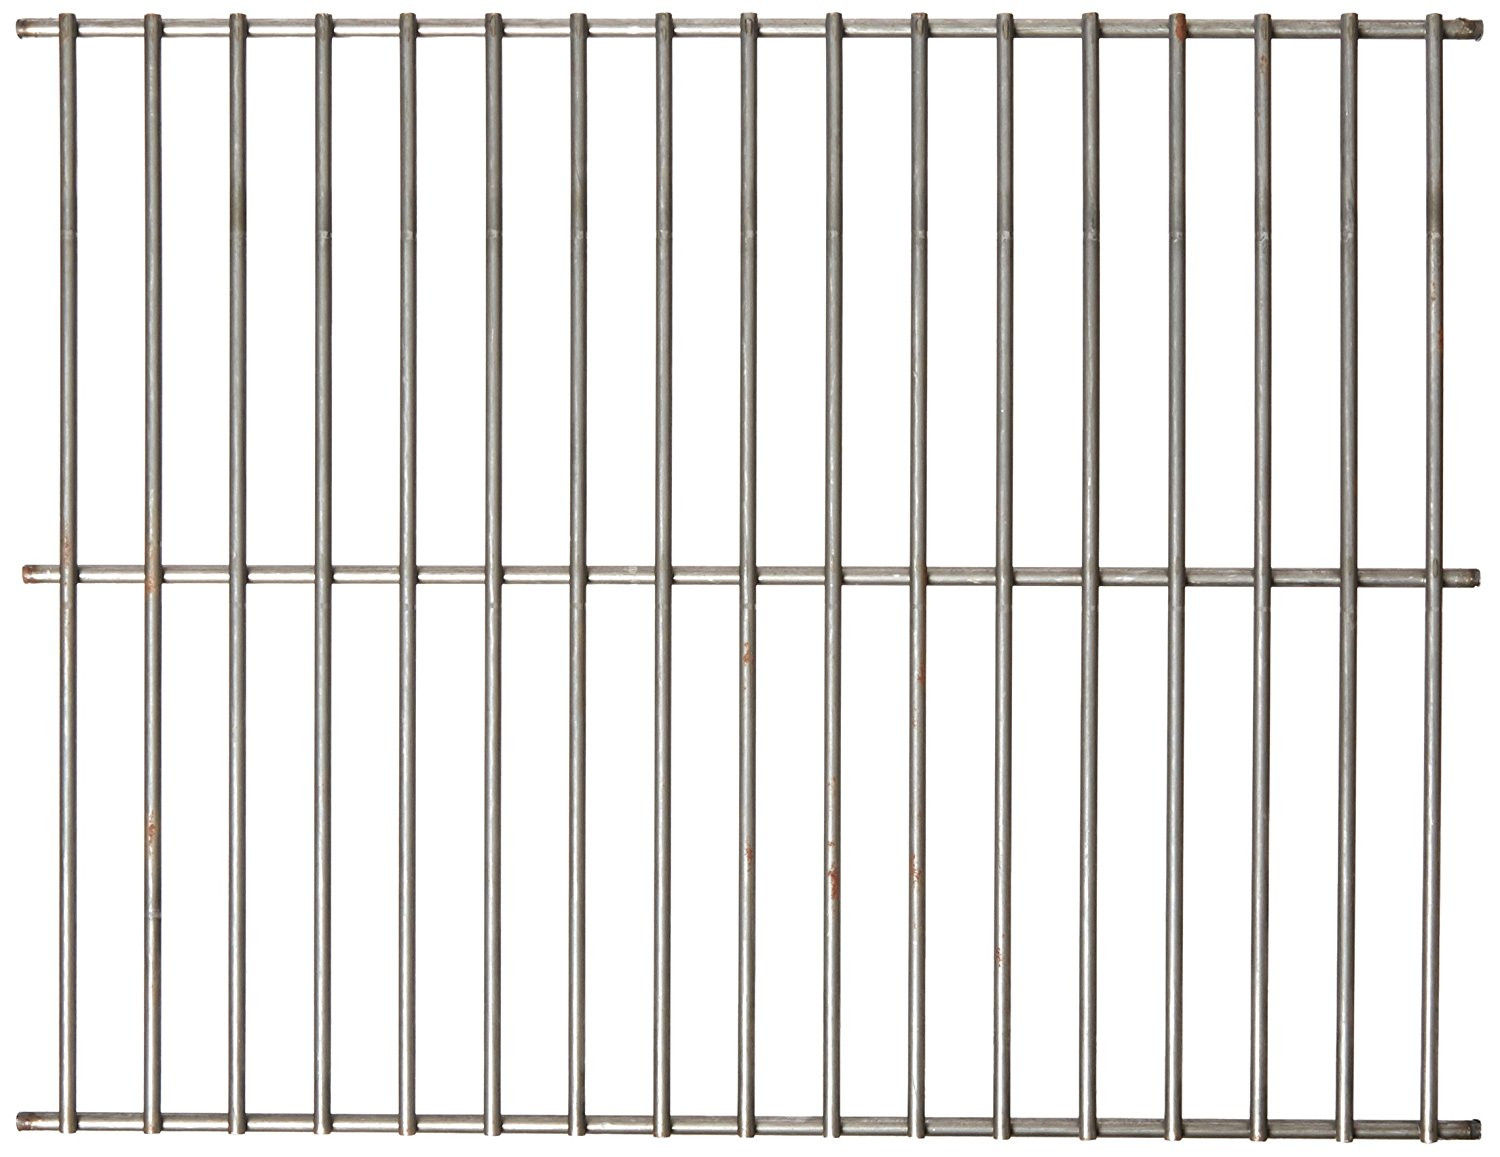 Steel wire rock grate for MHP, PGS brand gas grills